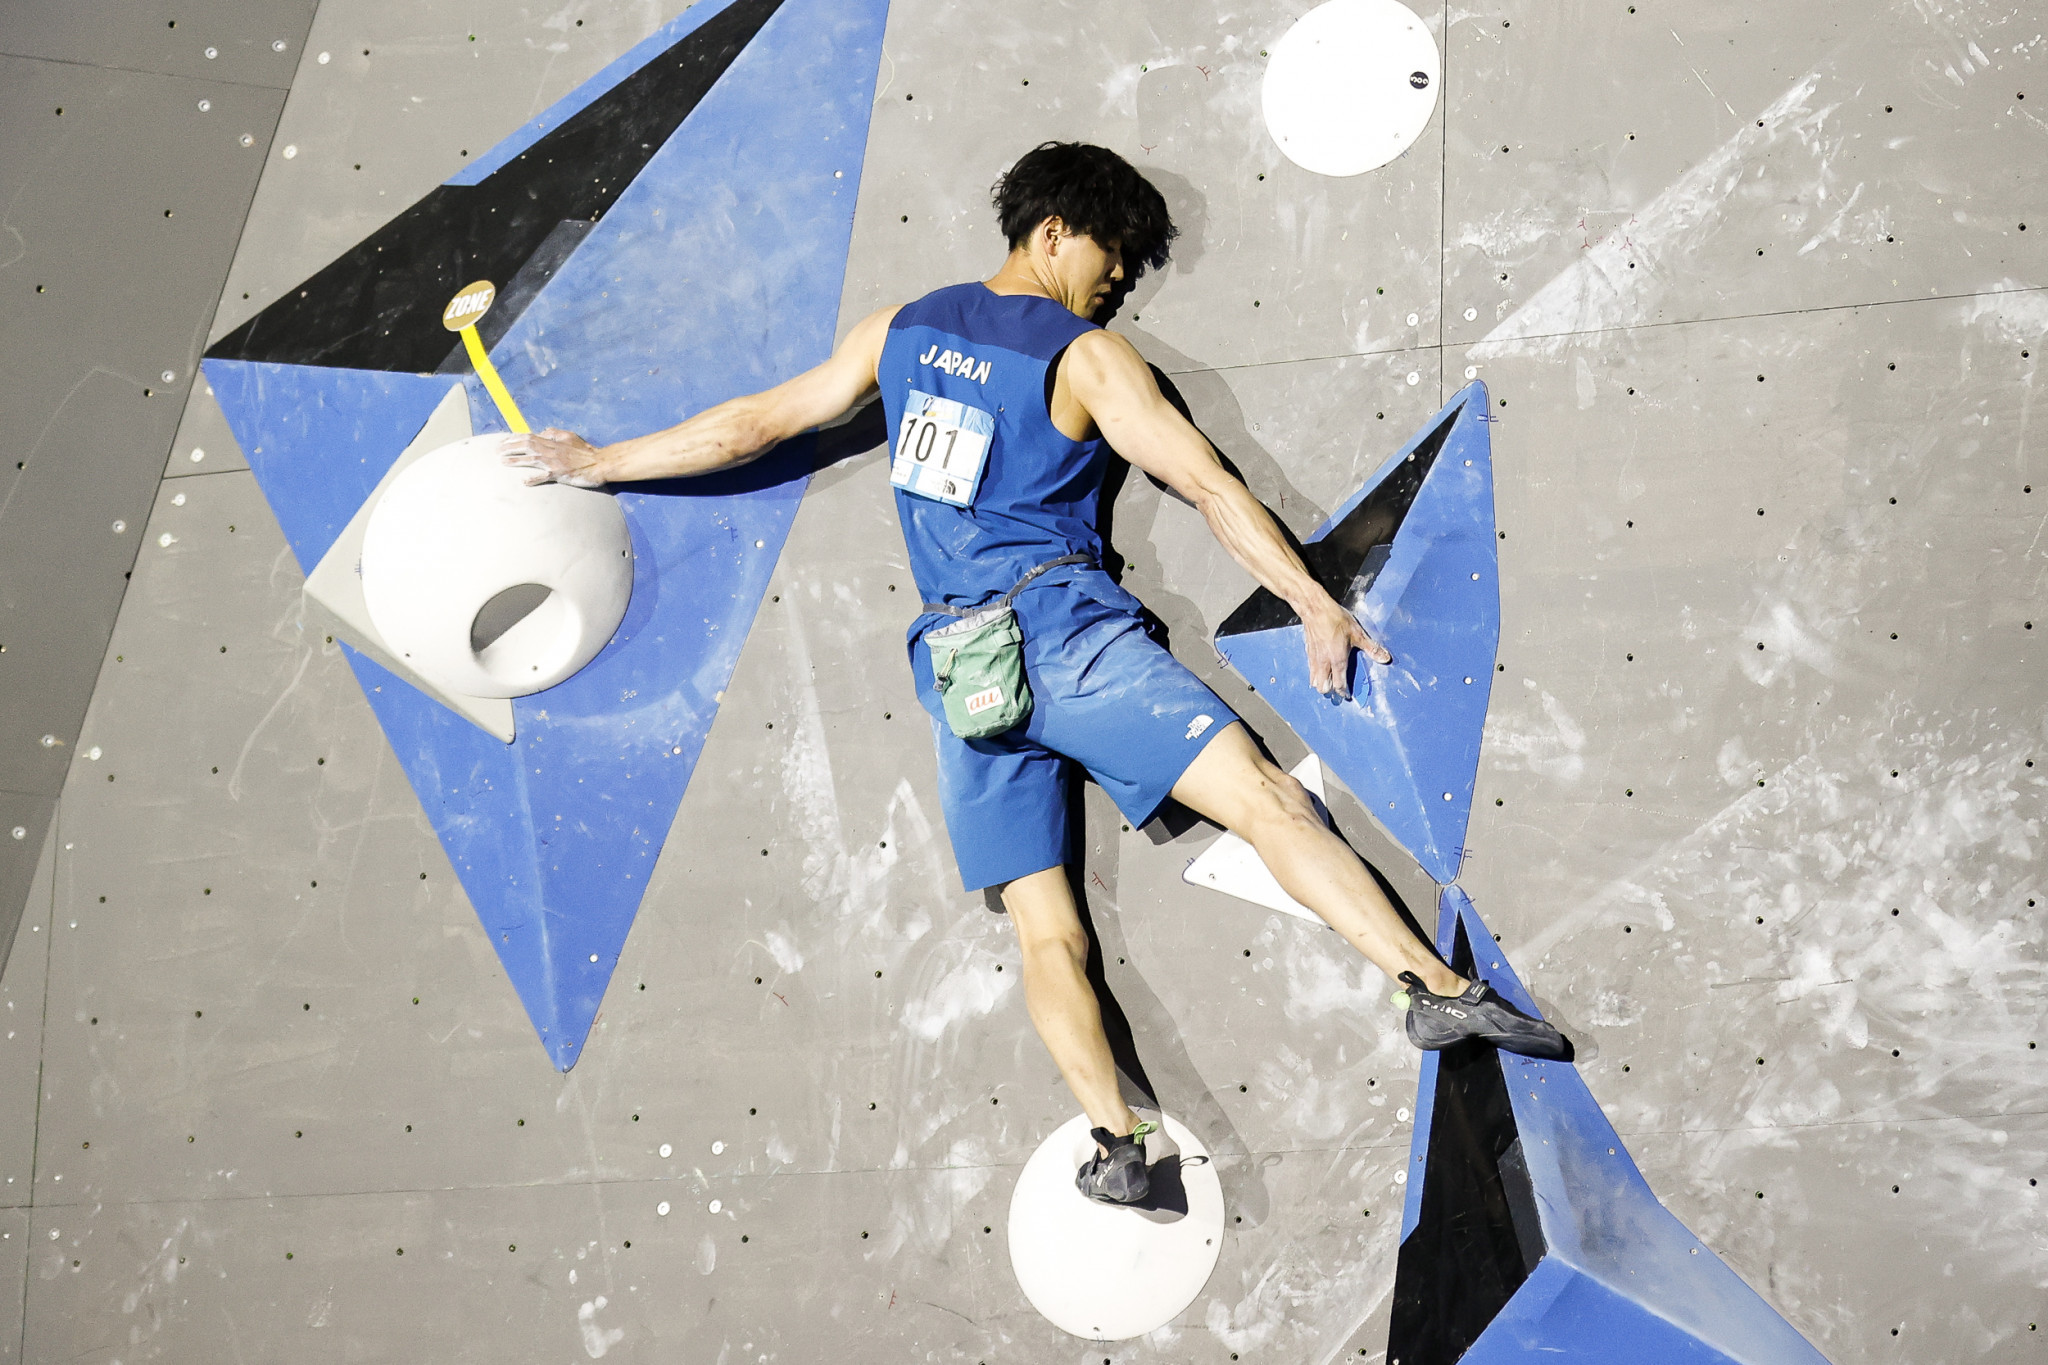 Fujii Kokoro is one of 12 Japanese climbers set to compete in the men's event in Hachiōji ©Getty Images